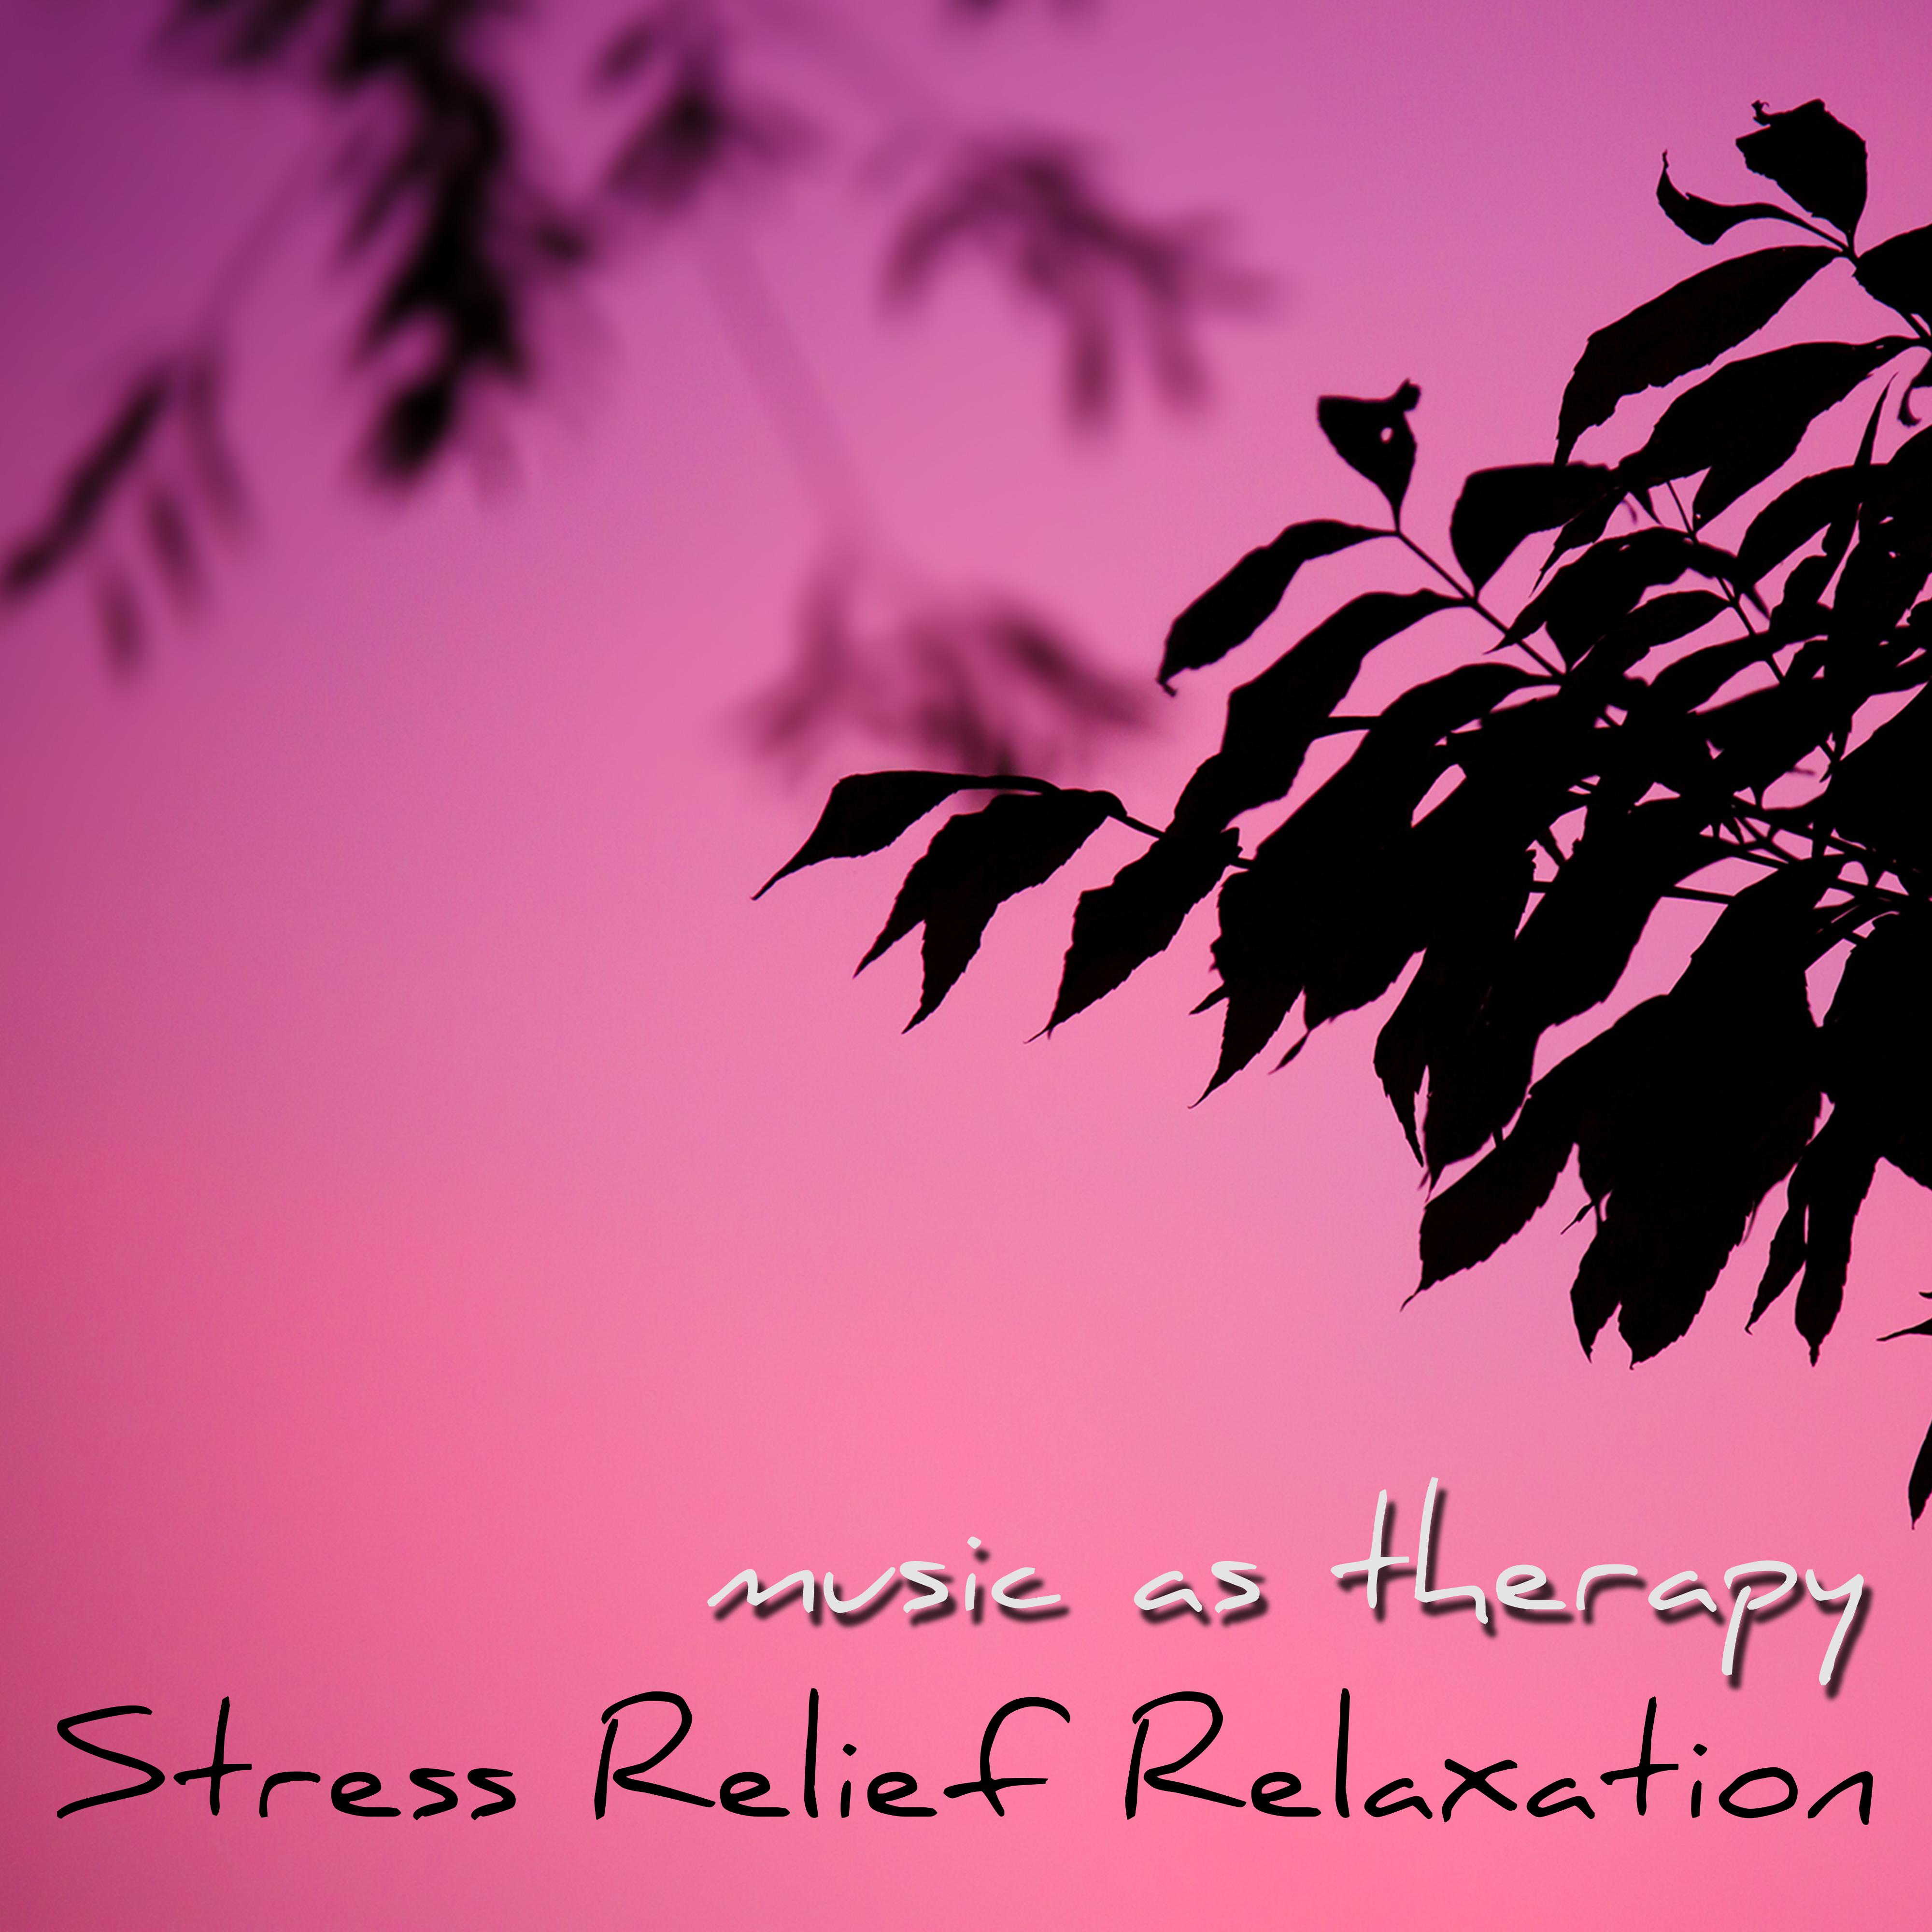 Stress Relief Relaxation Music as Therapy  Musical Therapy World Soothing Sounds